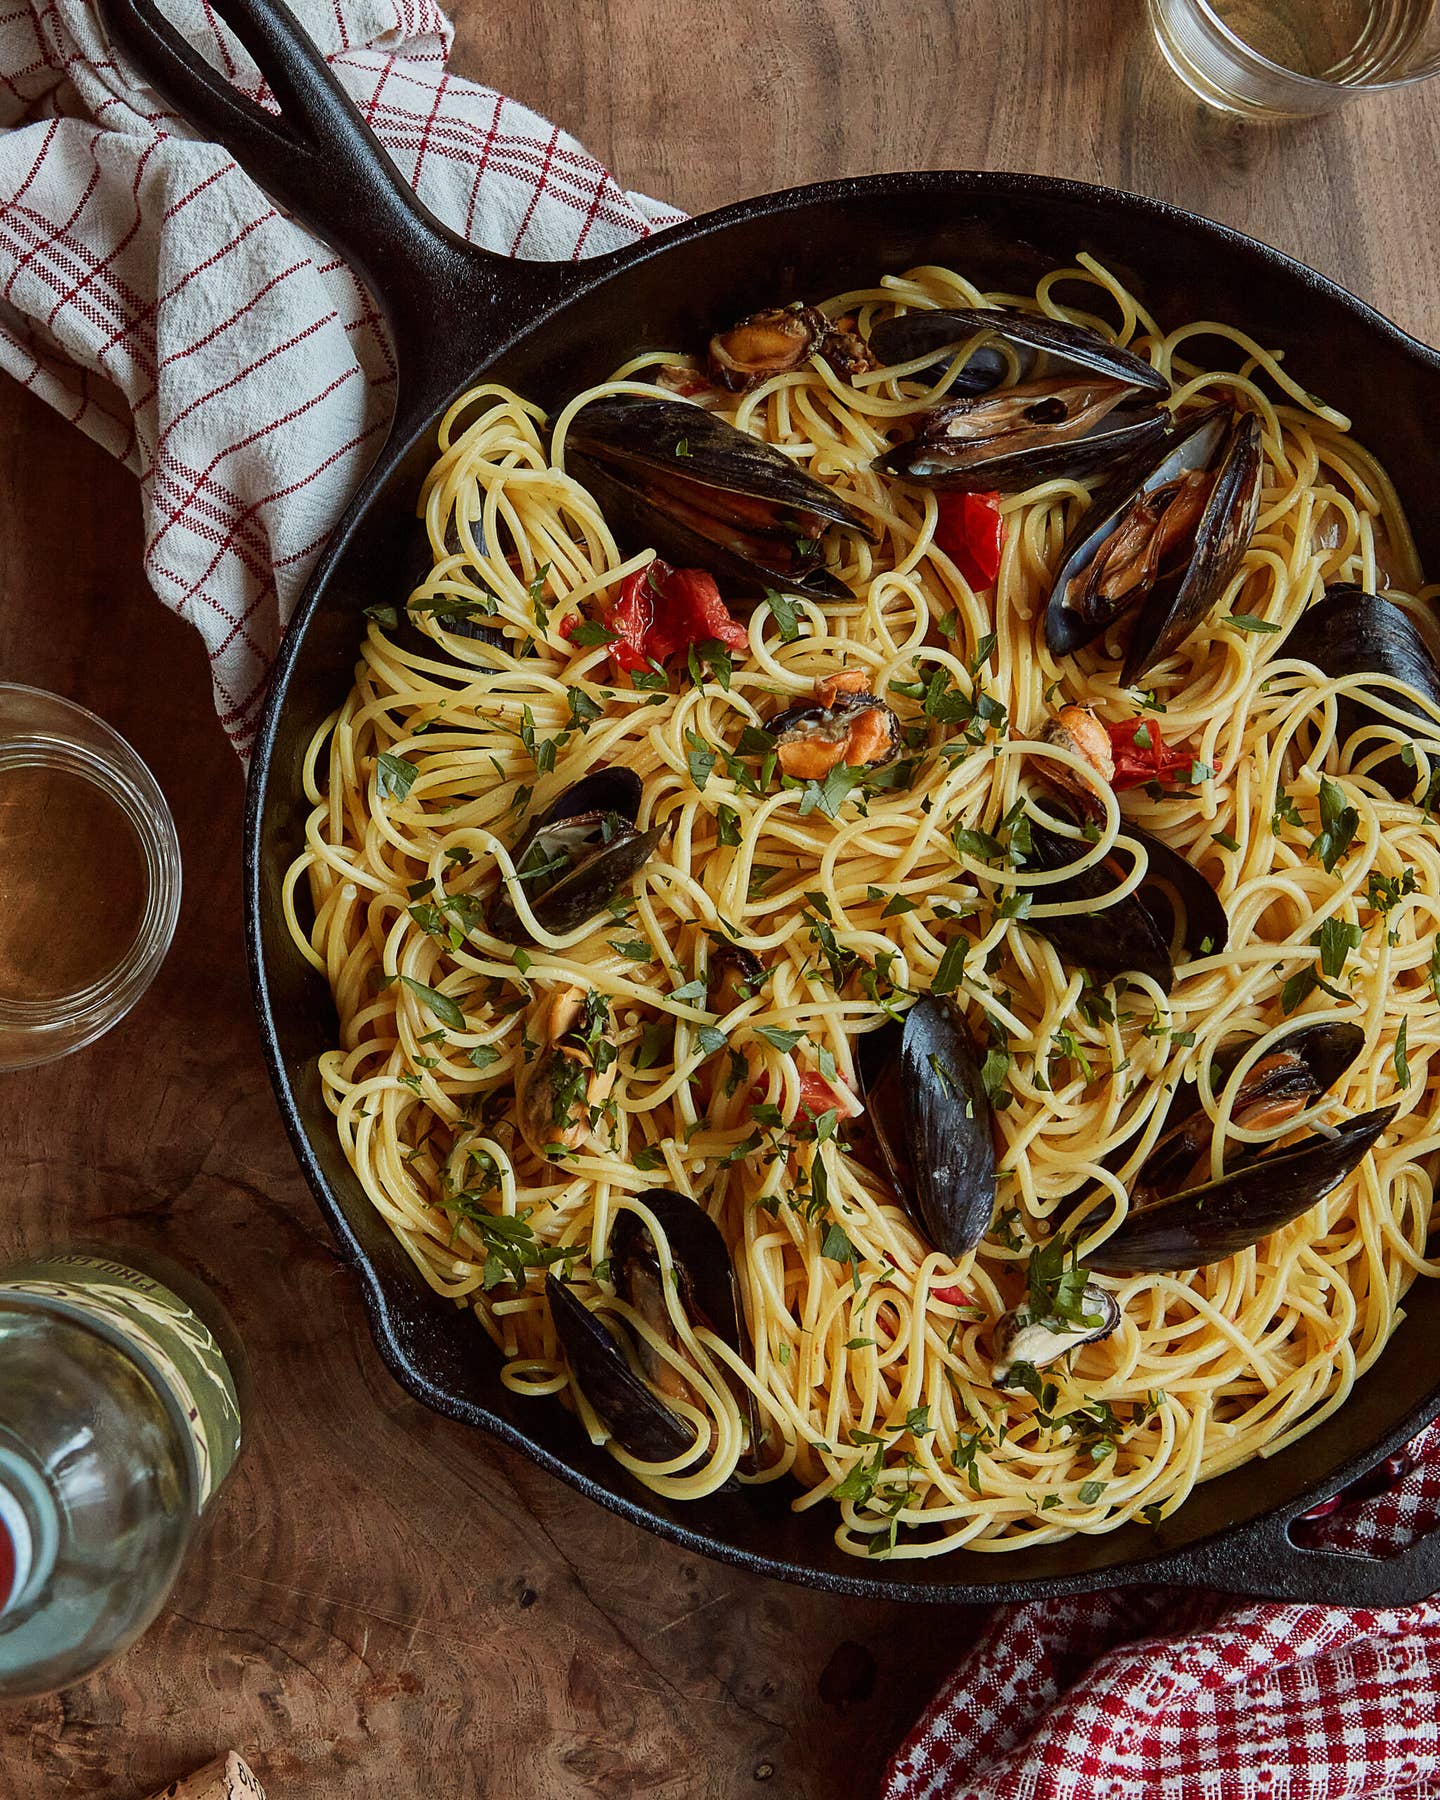 Making Ponza’s Famous Mussel Pasta Is Easier Than You Think